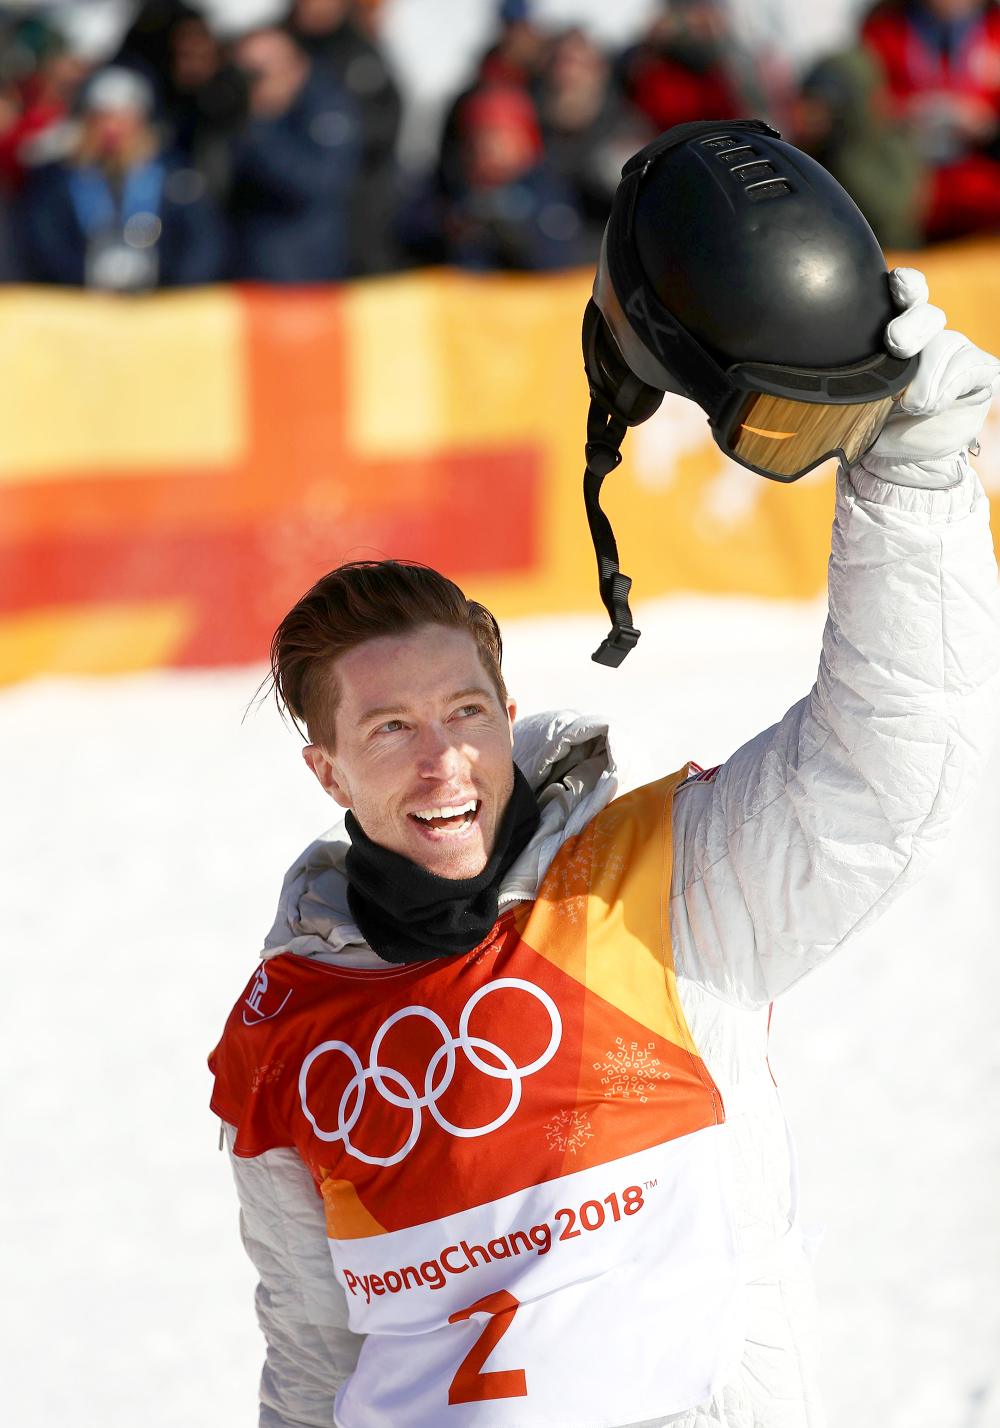 Shaun White of the United States reacts after his run during the Snowboard Men's Halfpipe Qualification on day four of the PyeongChang 2018 Winter Olympic Games at Phoenix Snow Park on February 13, 2018 in Pyeongchang-gun, South Korea.